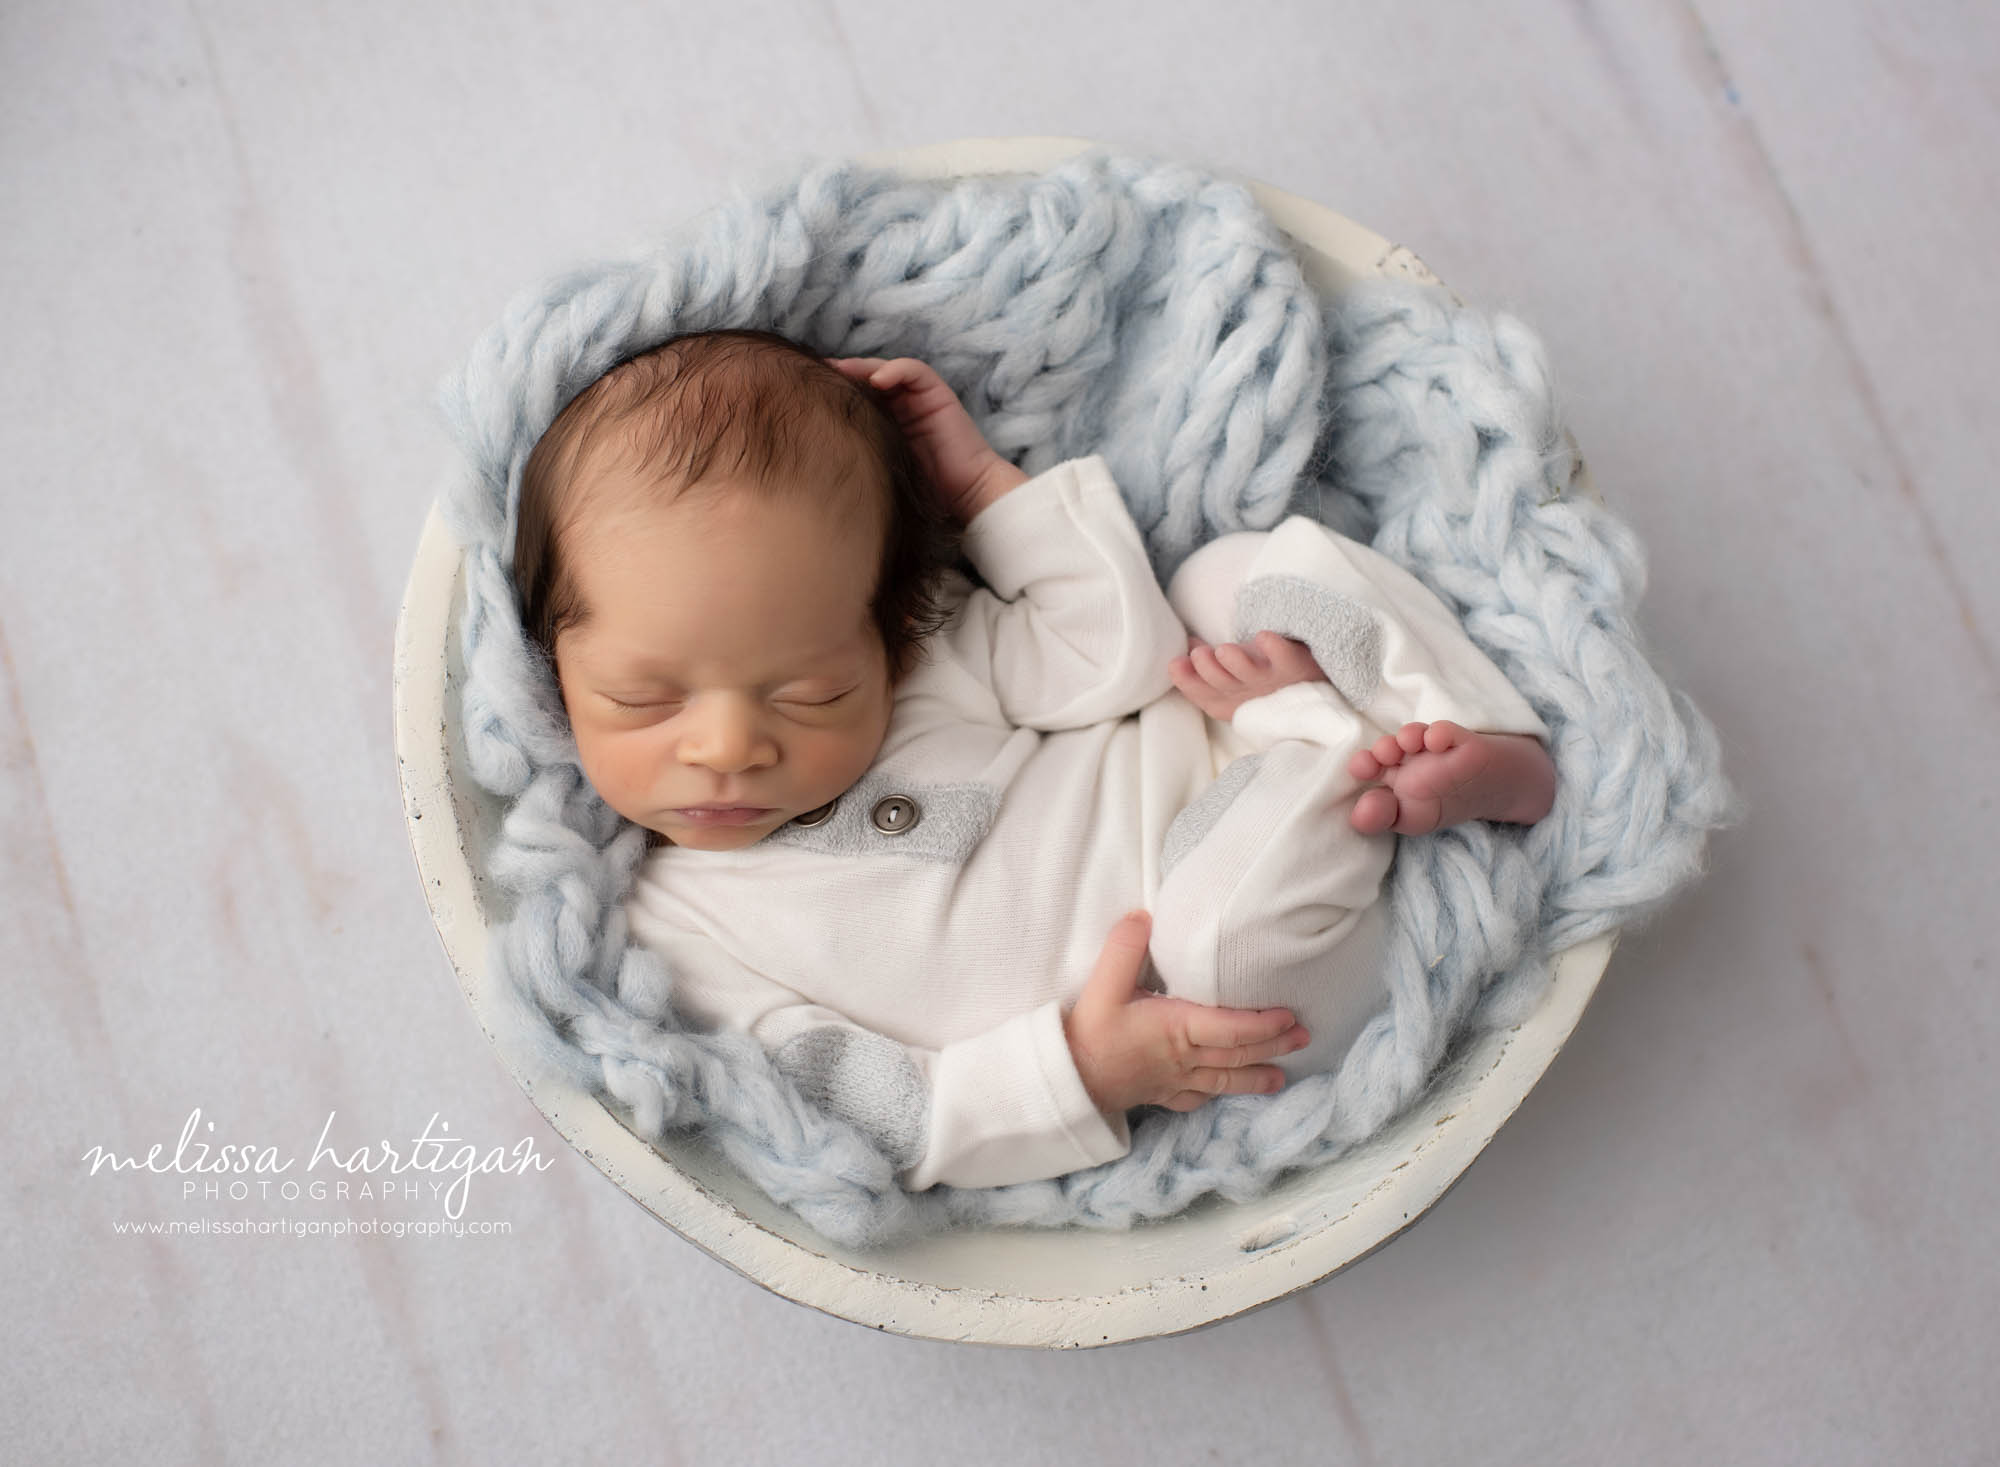 newborn baby boy posed in cream wooden bowl with light blue knitted layer wearing cream colored newborn outfit